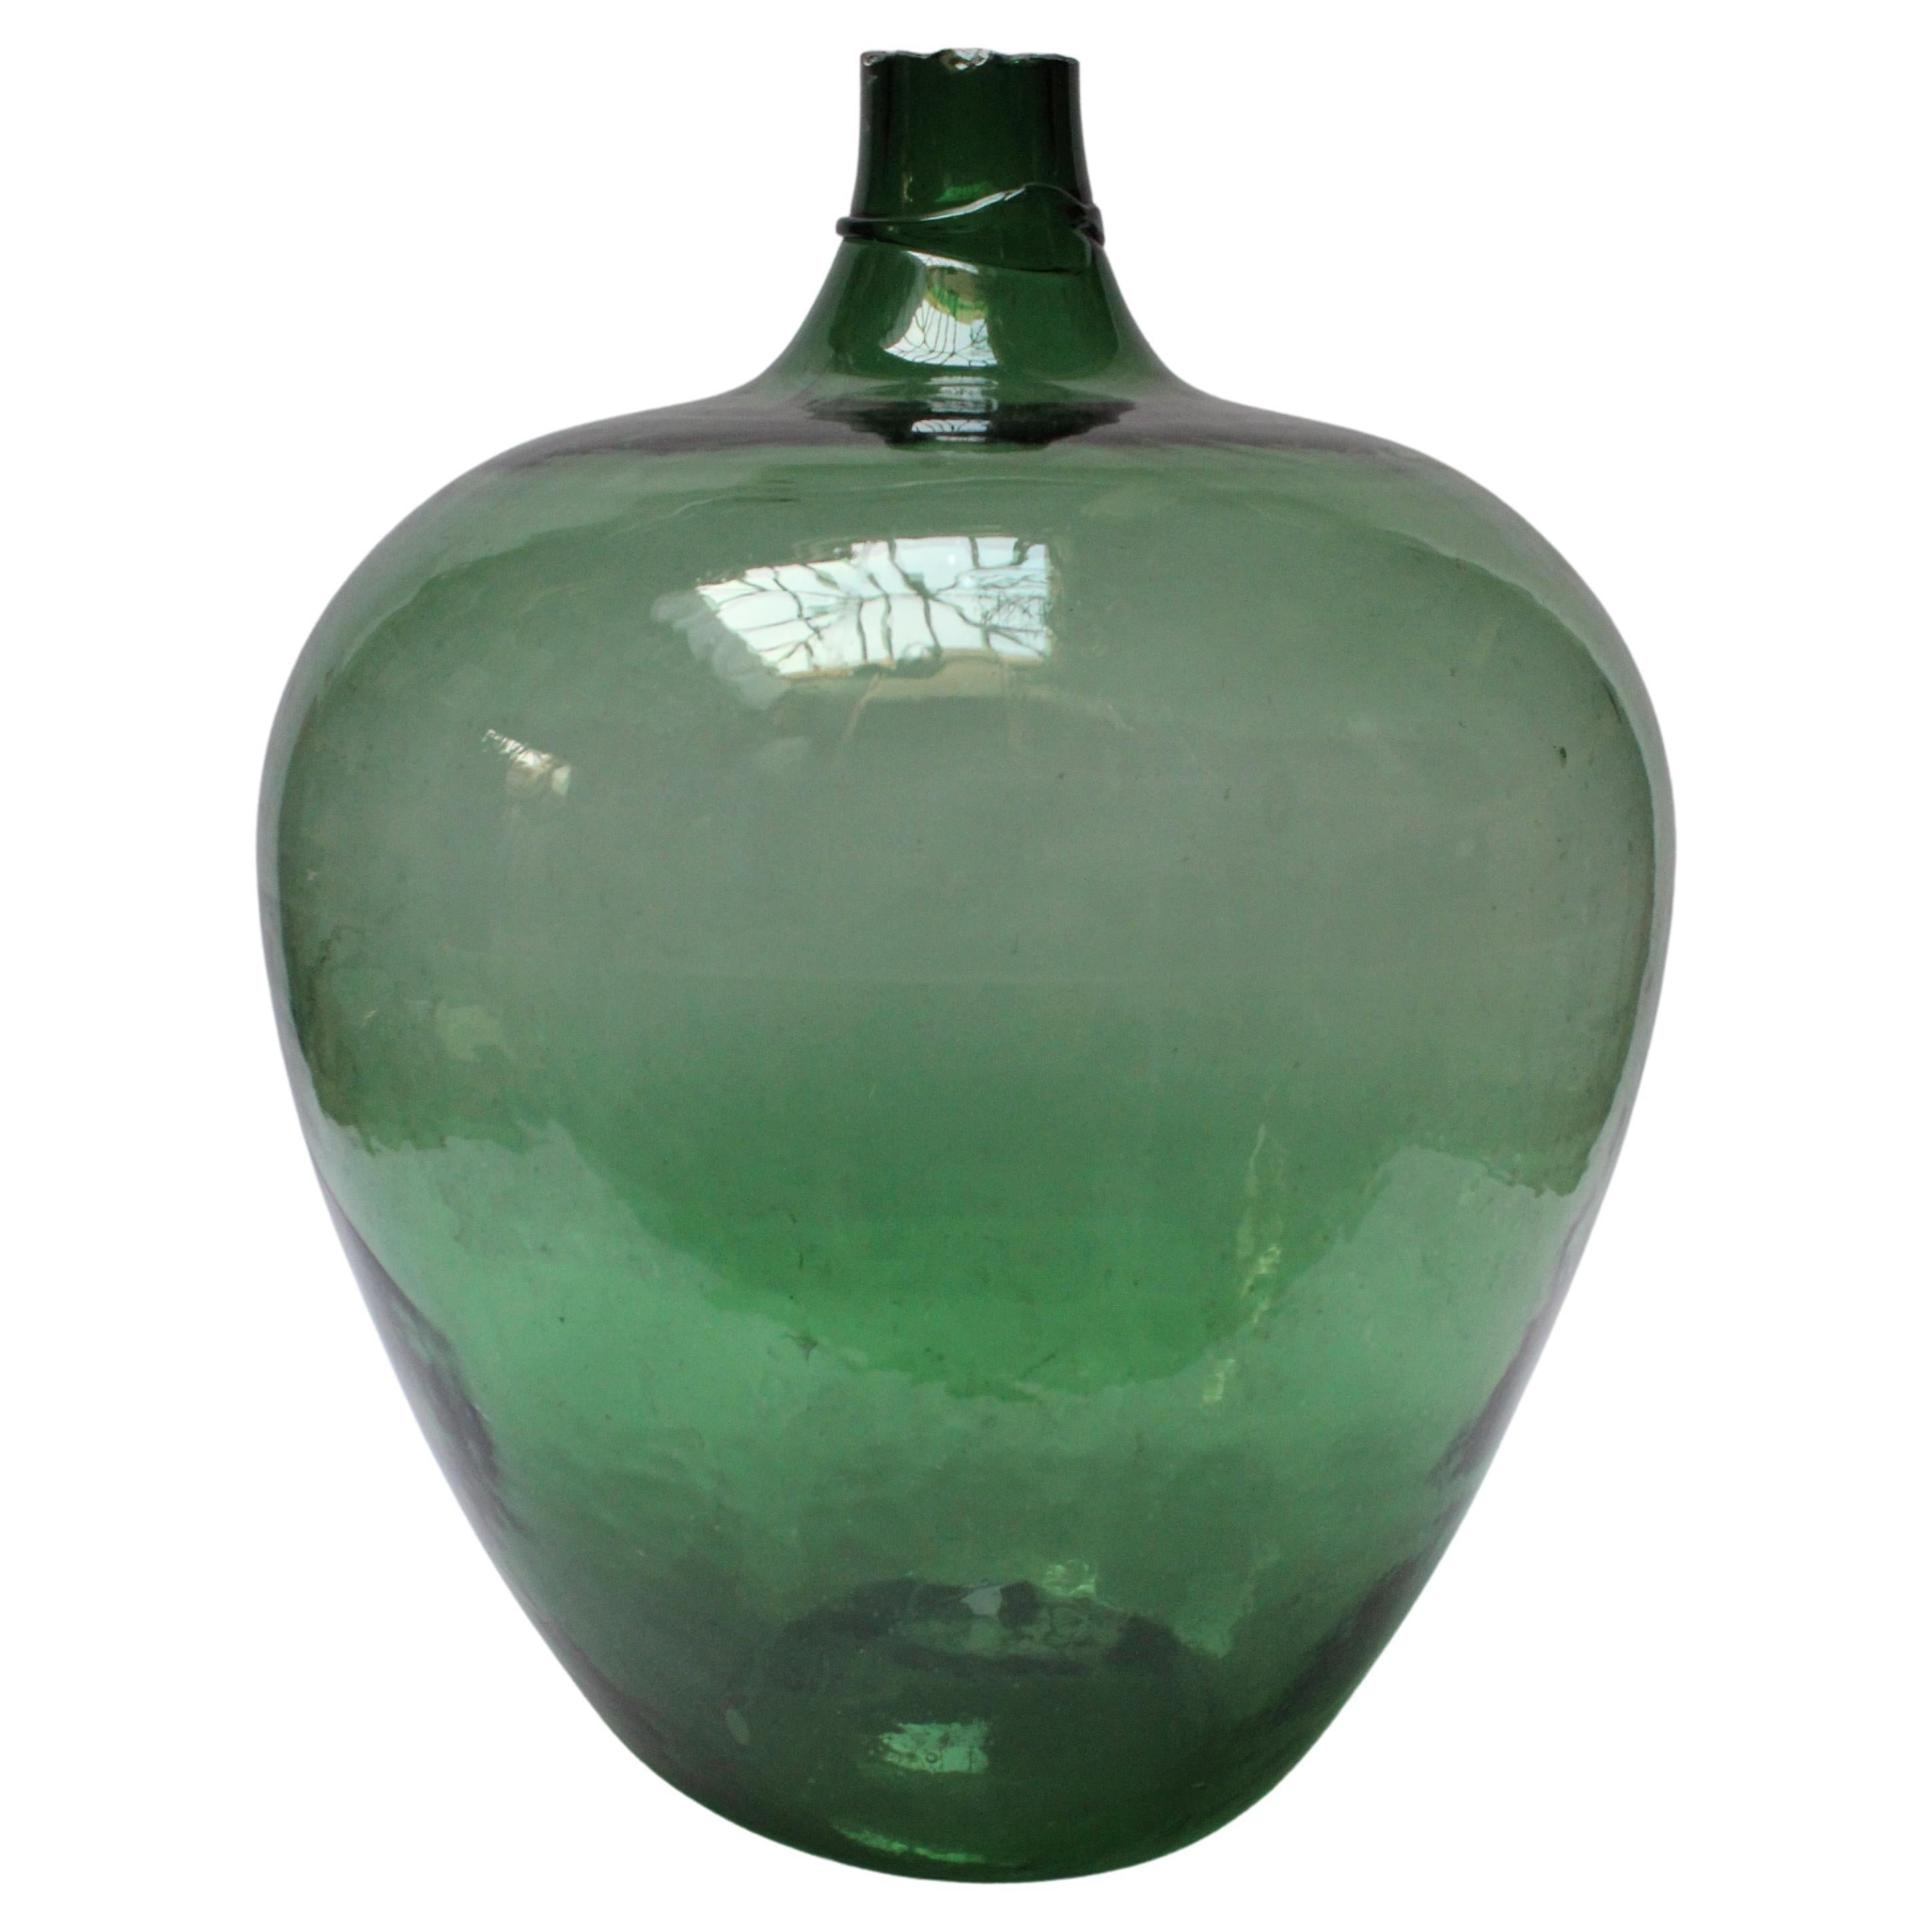 Antique Mouth Blown Glass Bulbous Demijohn in Emerald Green